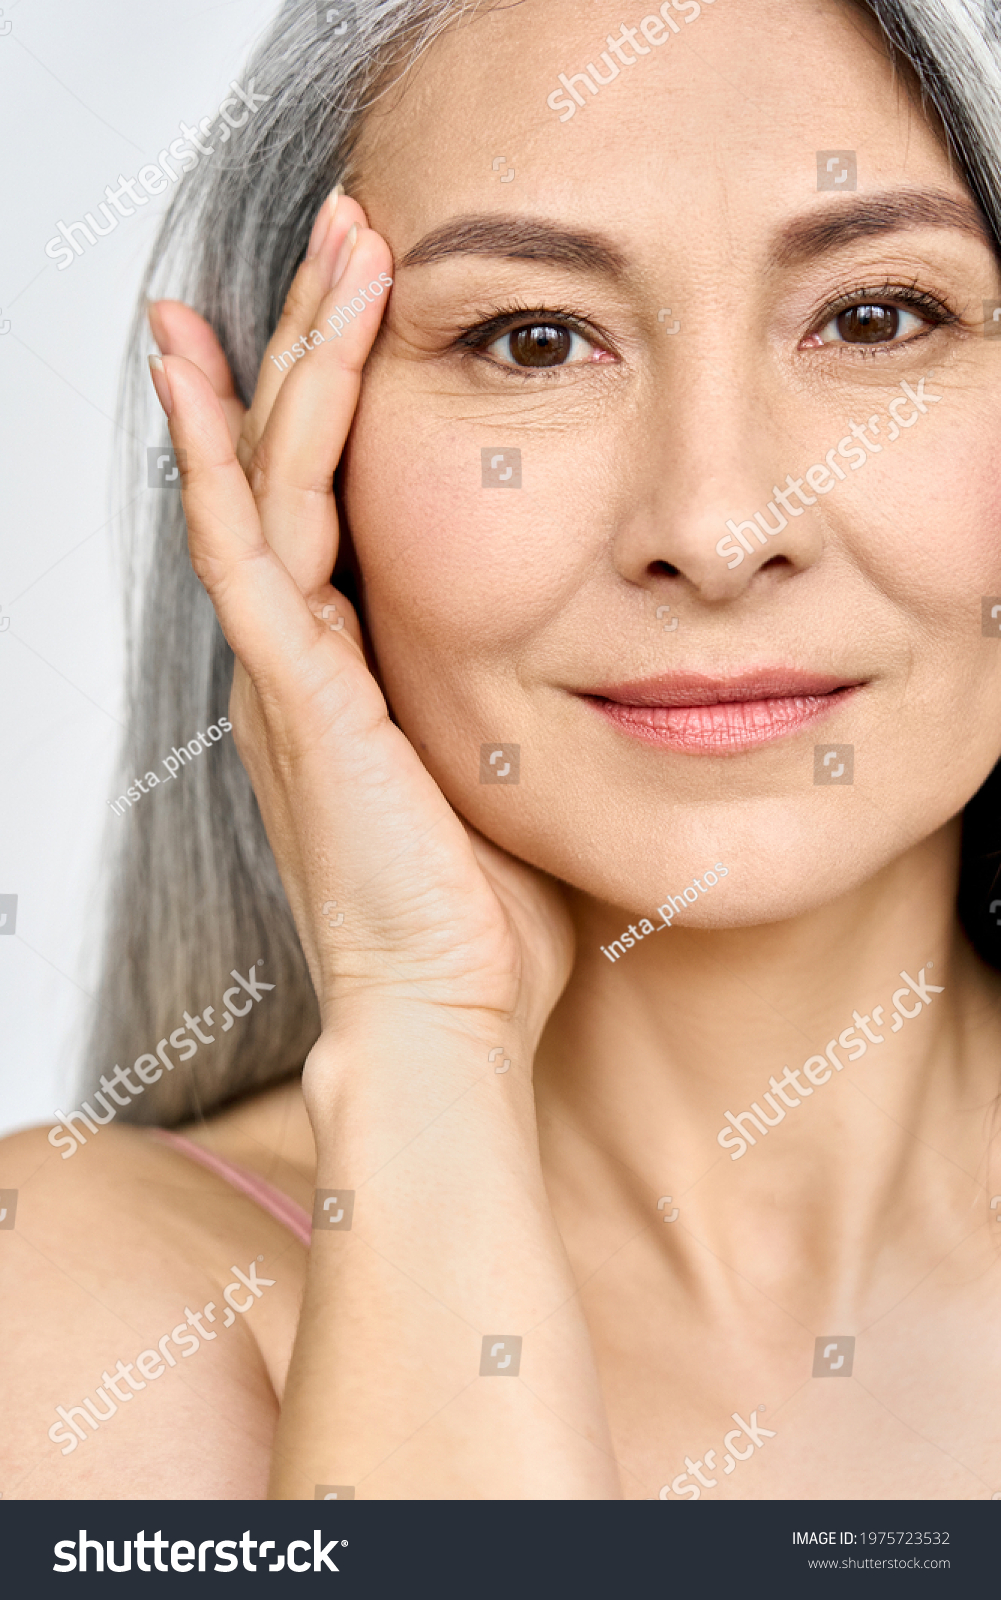 Vertical portrait of middle aged Asian woman's face with perfect skin. Older mature lady touching pampering face with hand. Advertising of cosmetology salon rejuvenating spa procedures skincare. #1975723532